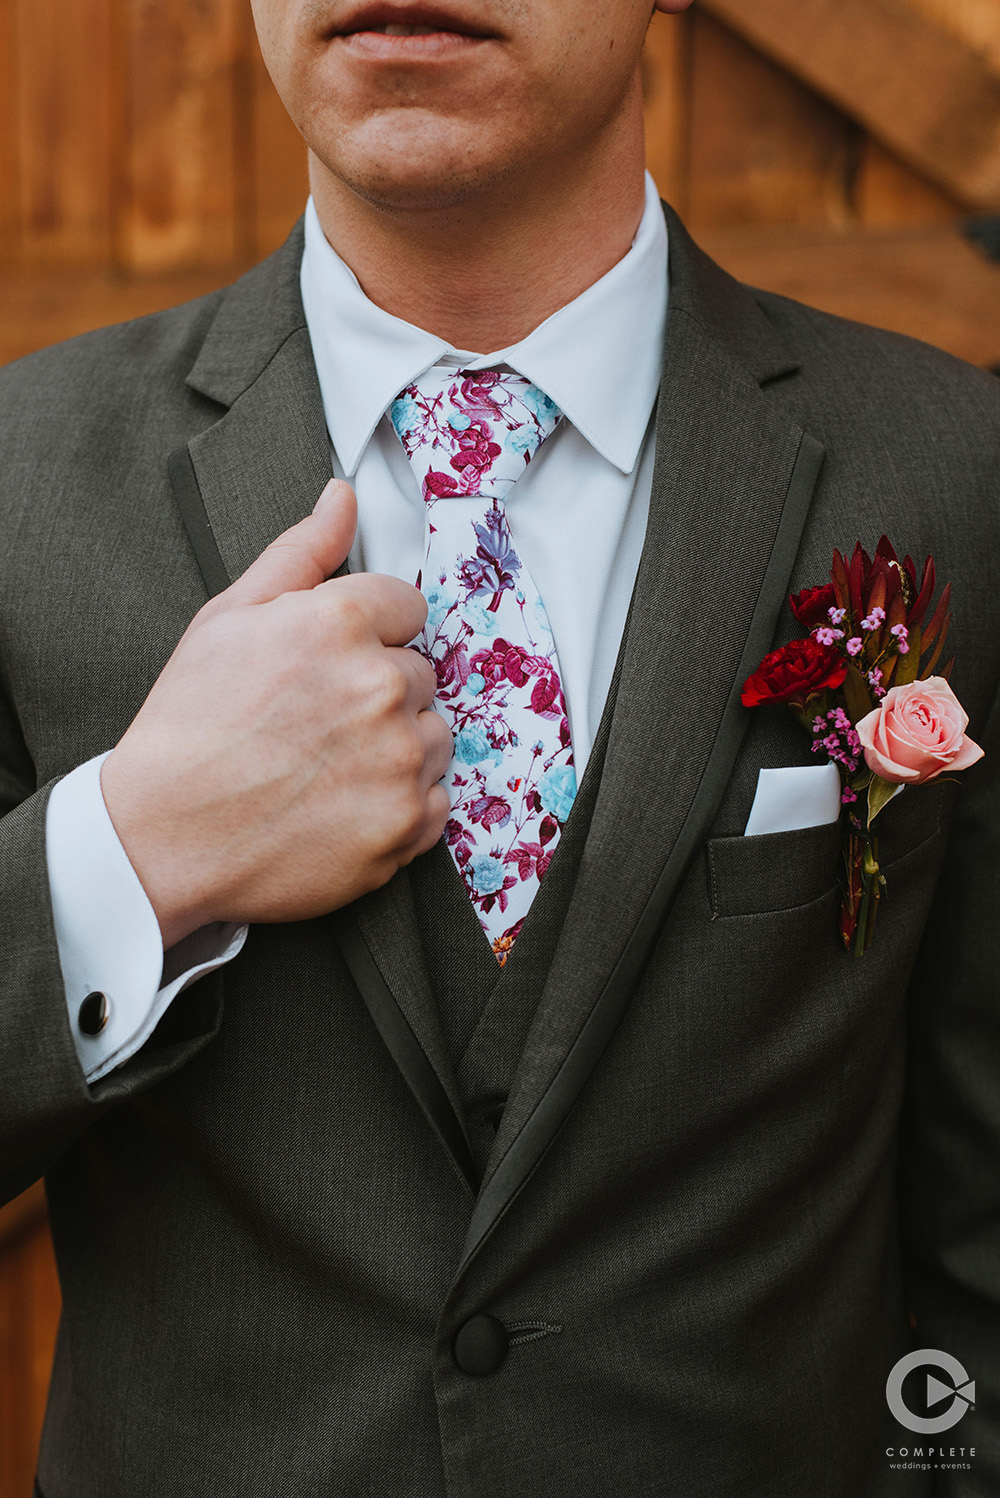 print tie in floral blues and purples